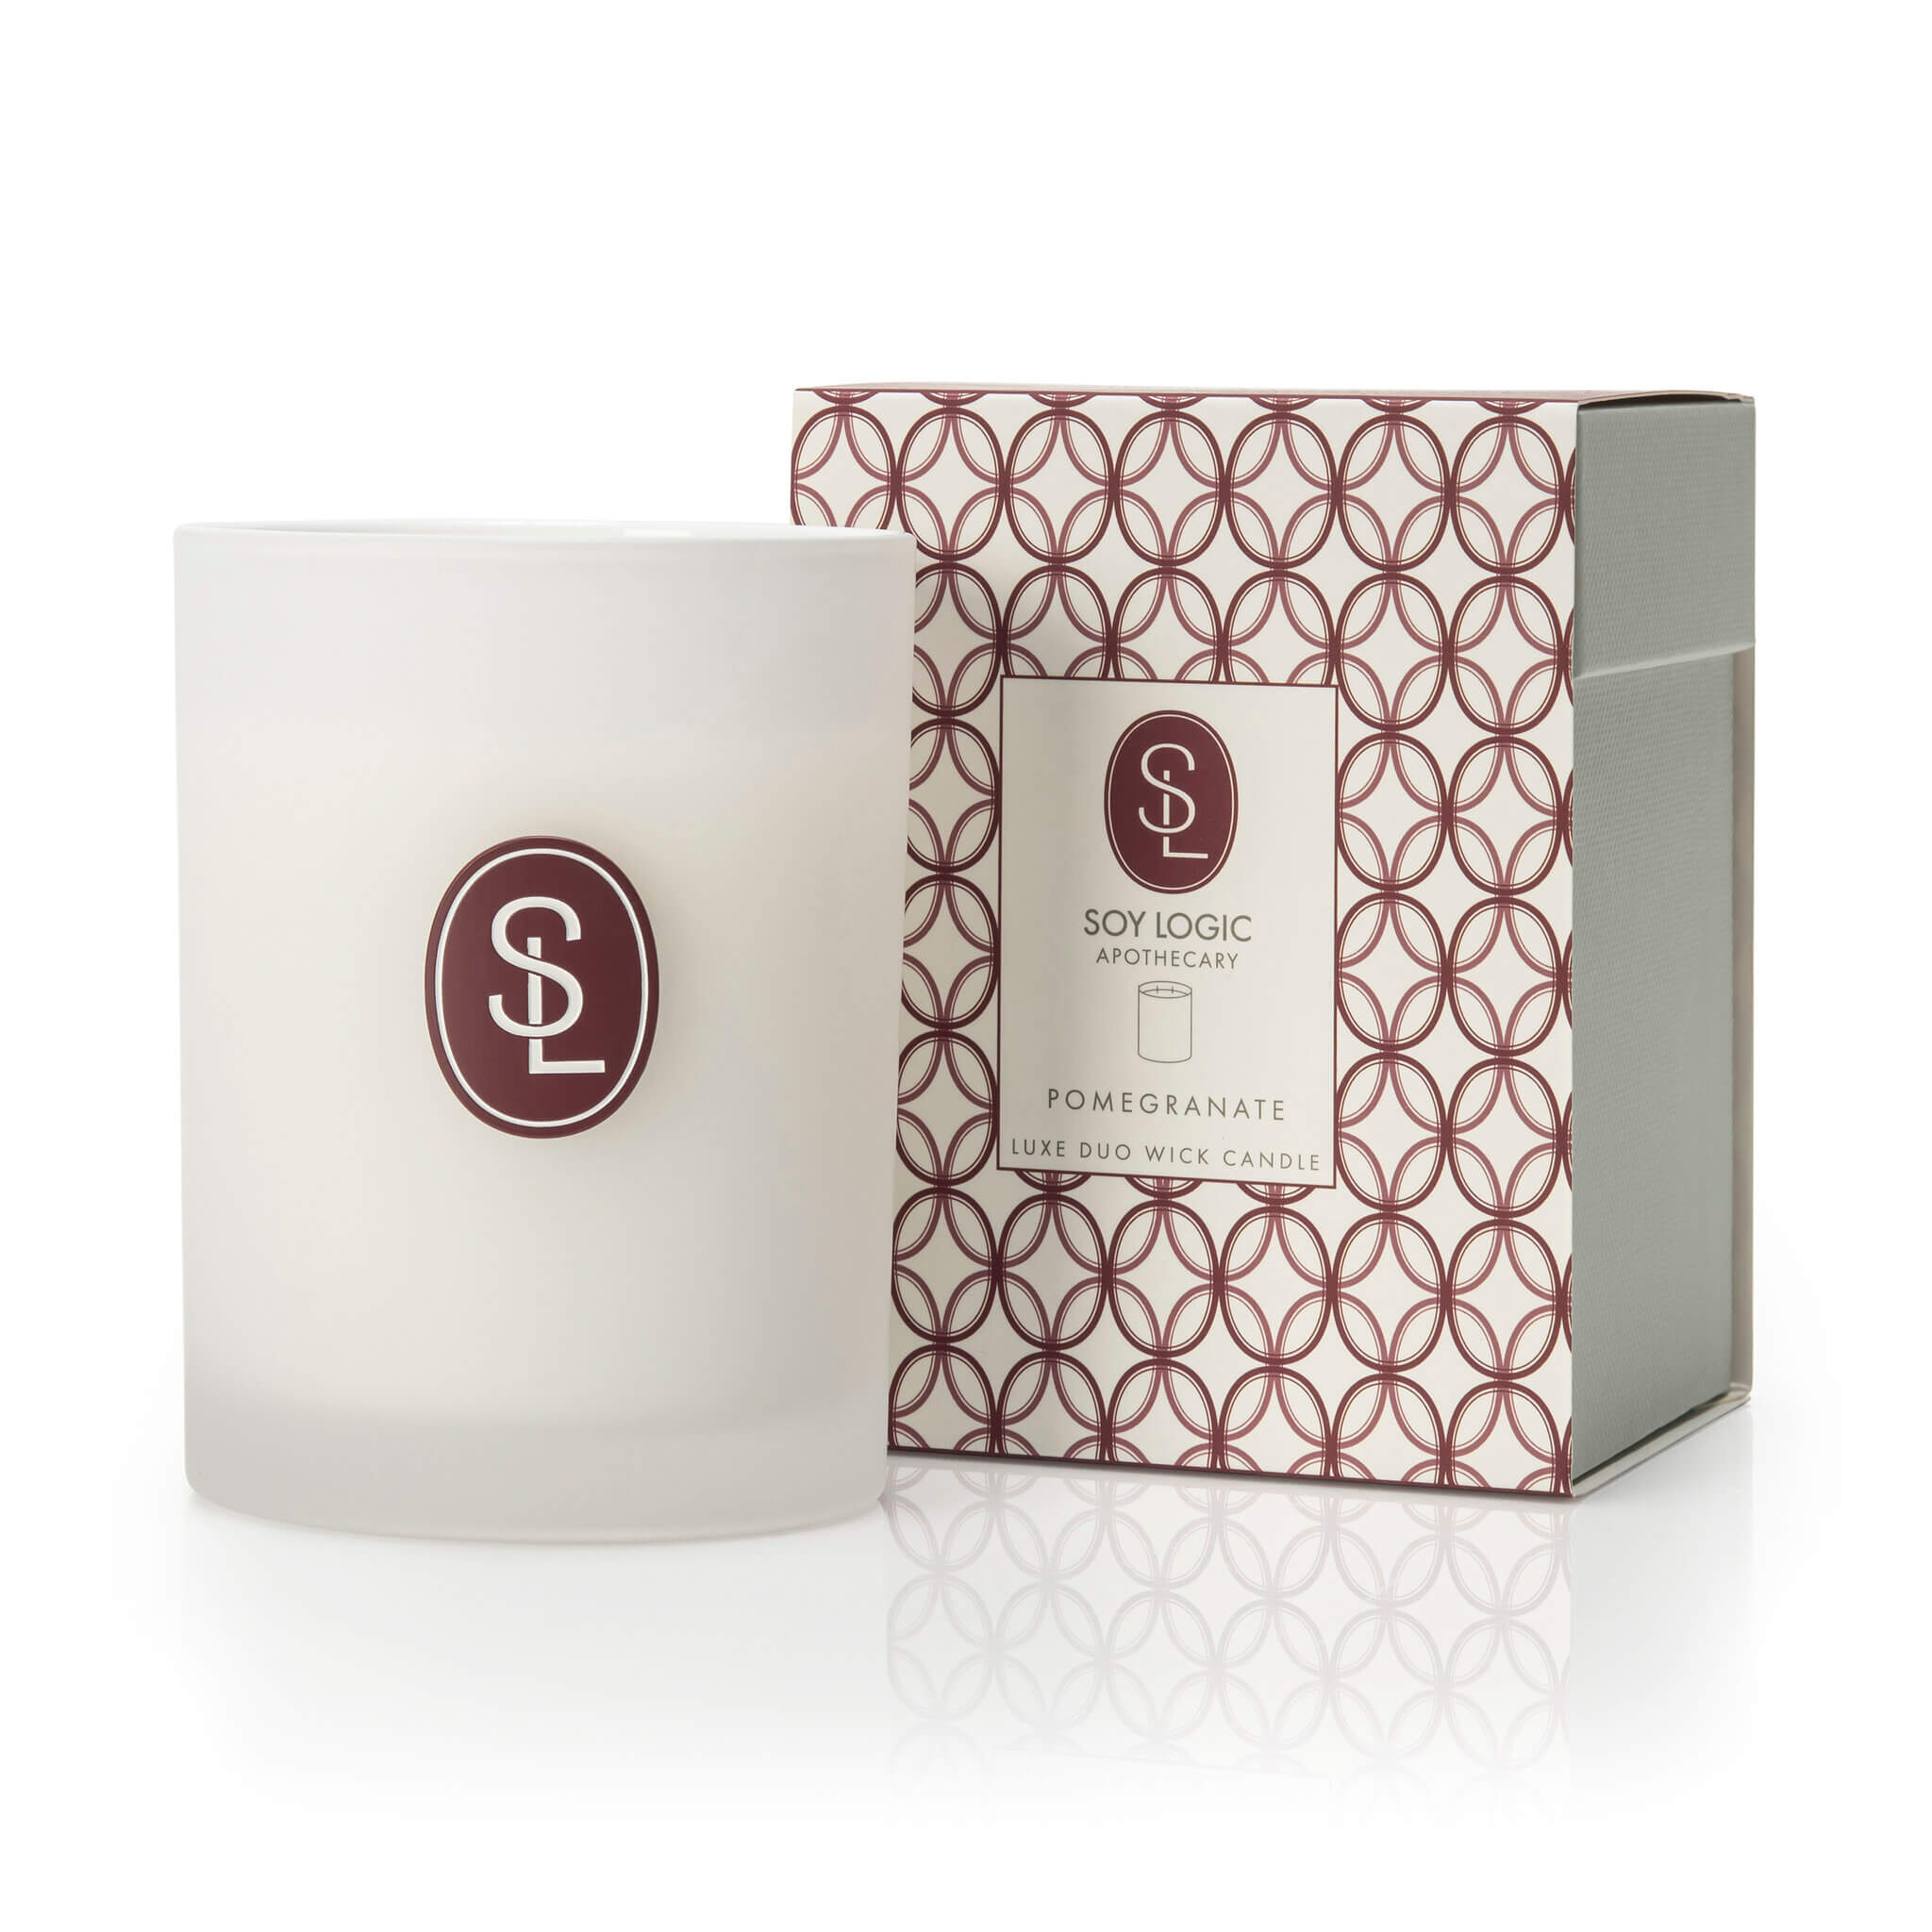 Pomegranate Classic Duo Wick Candle